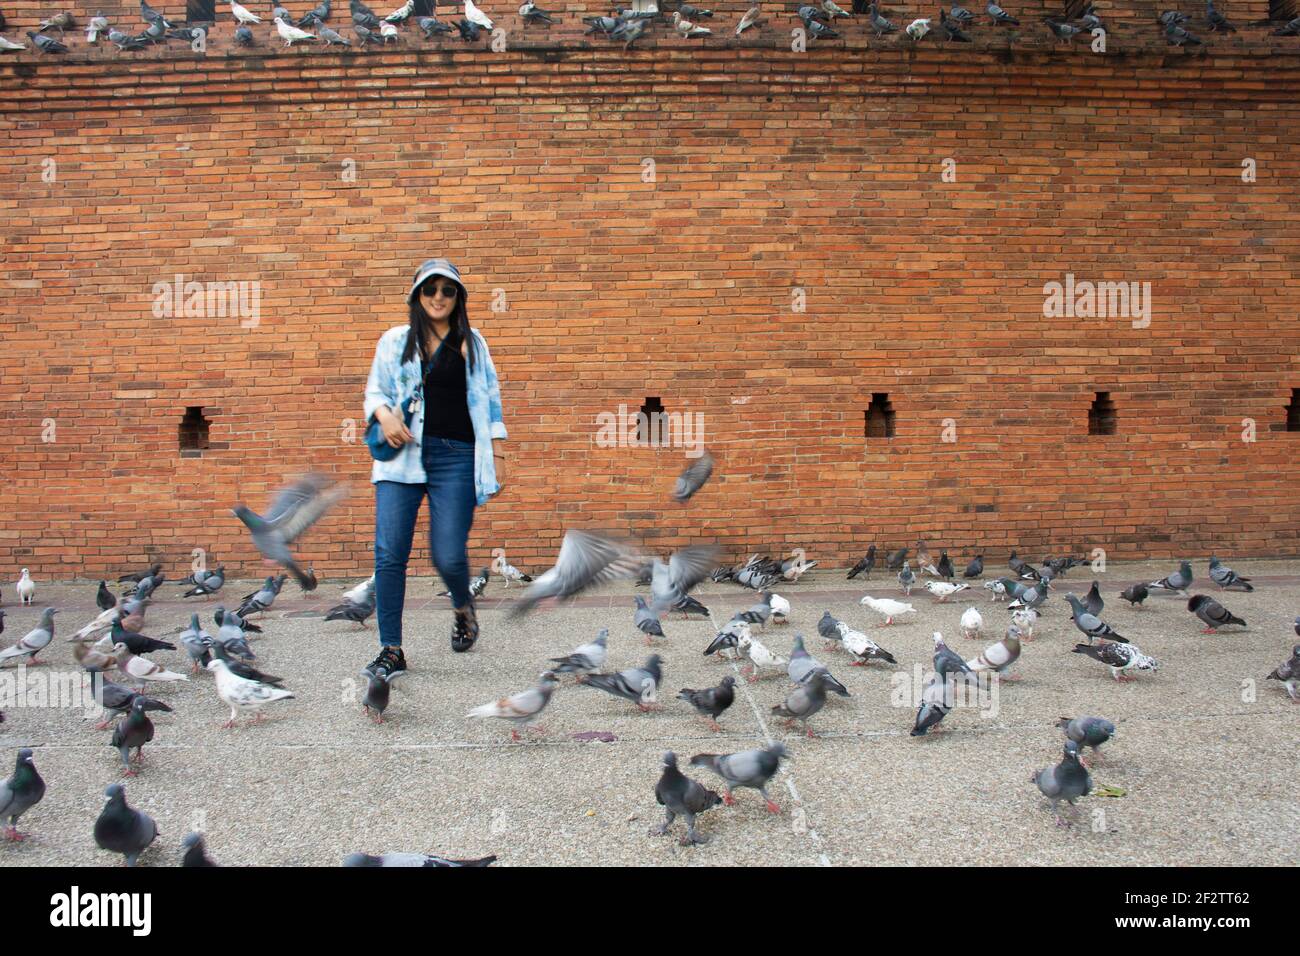 Travelers thai women people travel visit and take photo with dove birds at Thapae ancient gate or Chiang Mai old city brick walls and Tha Pae gates th Stock Photo